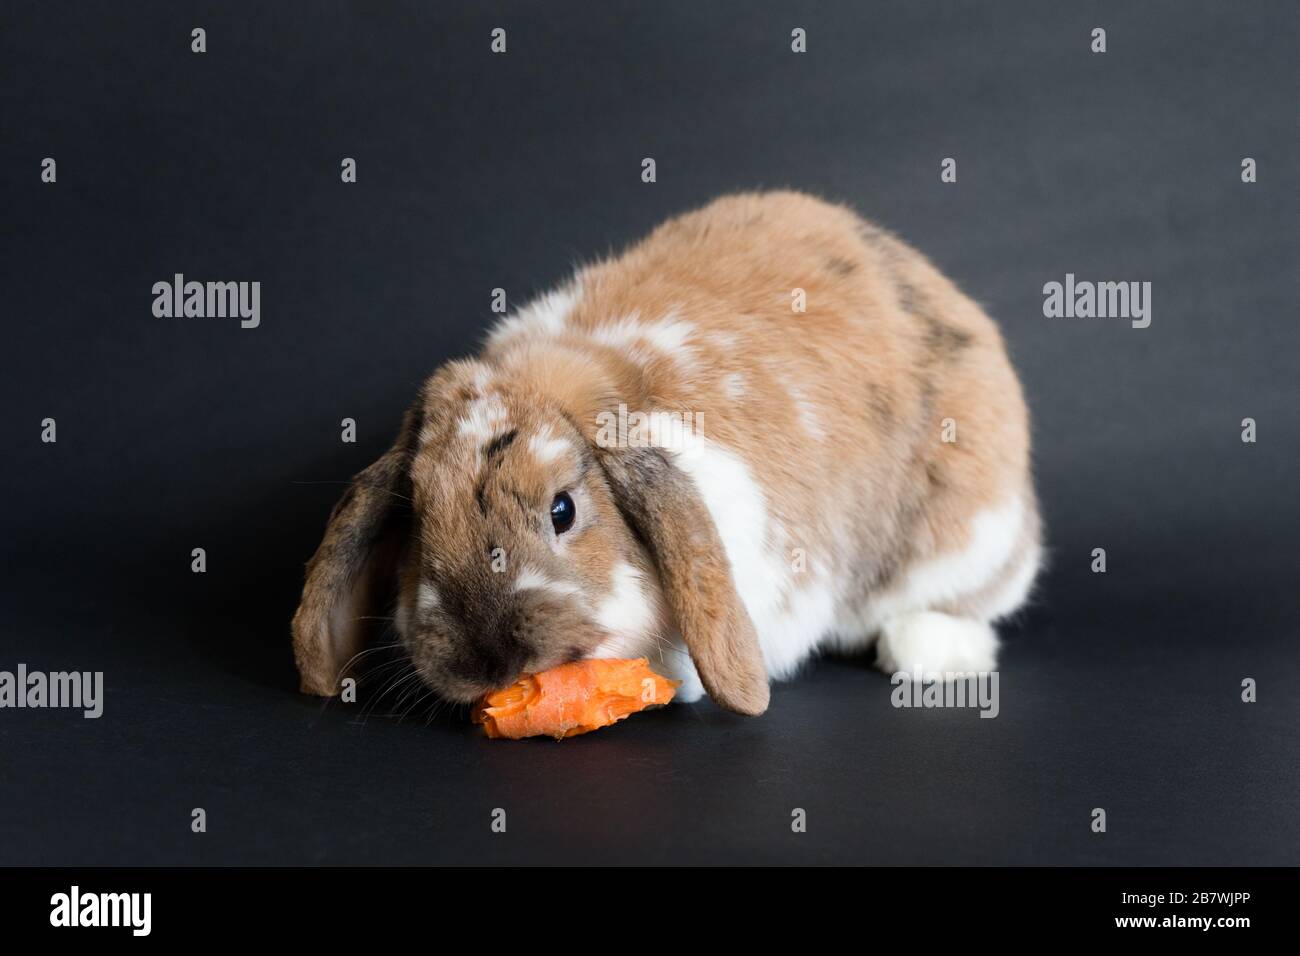 Lop eared bunny eating carrot, studio photo isolated on black background Stock Photo